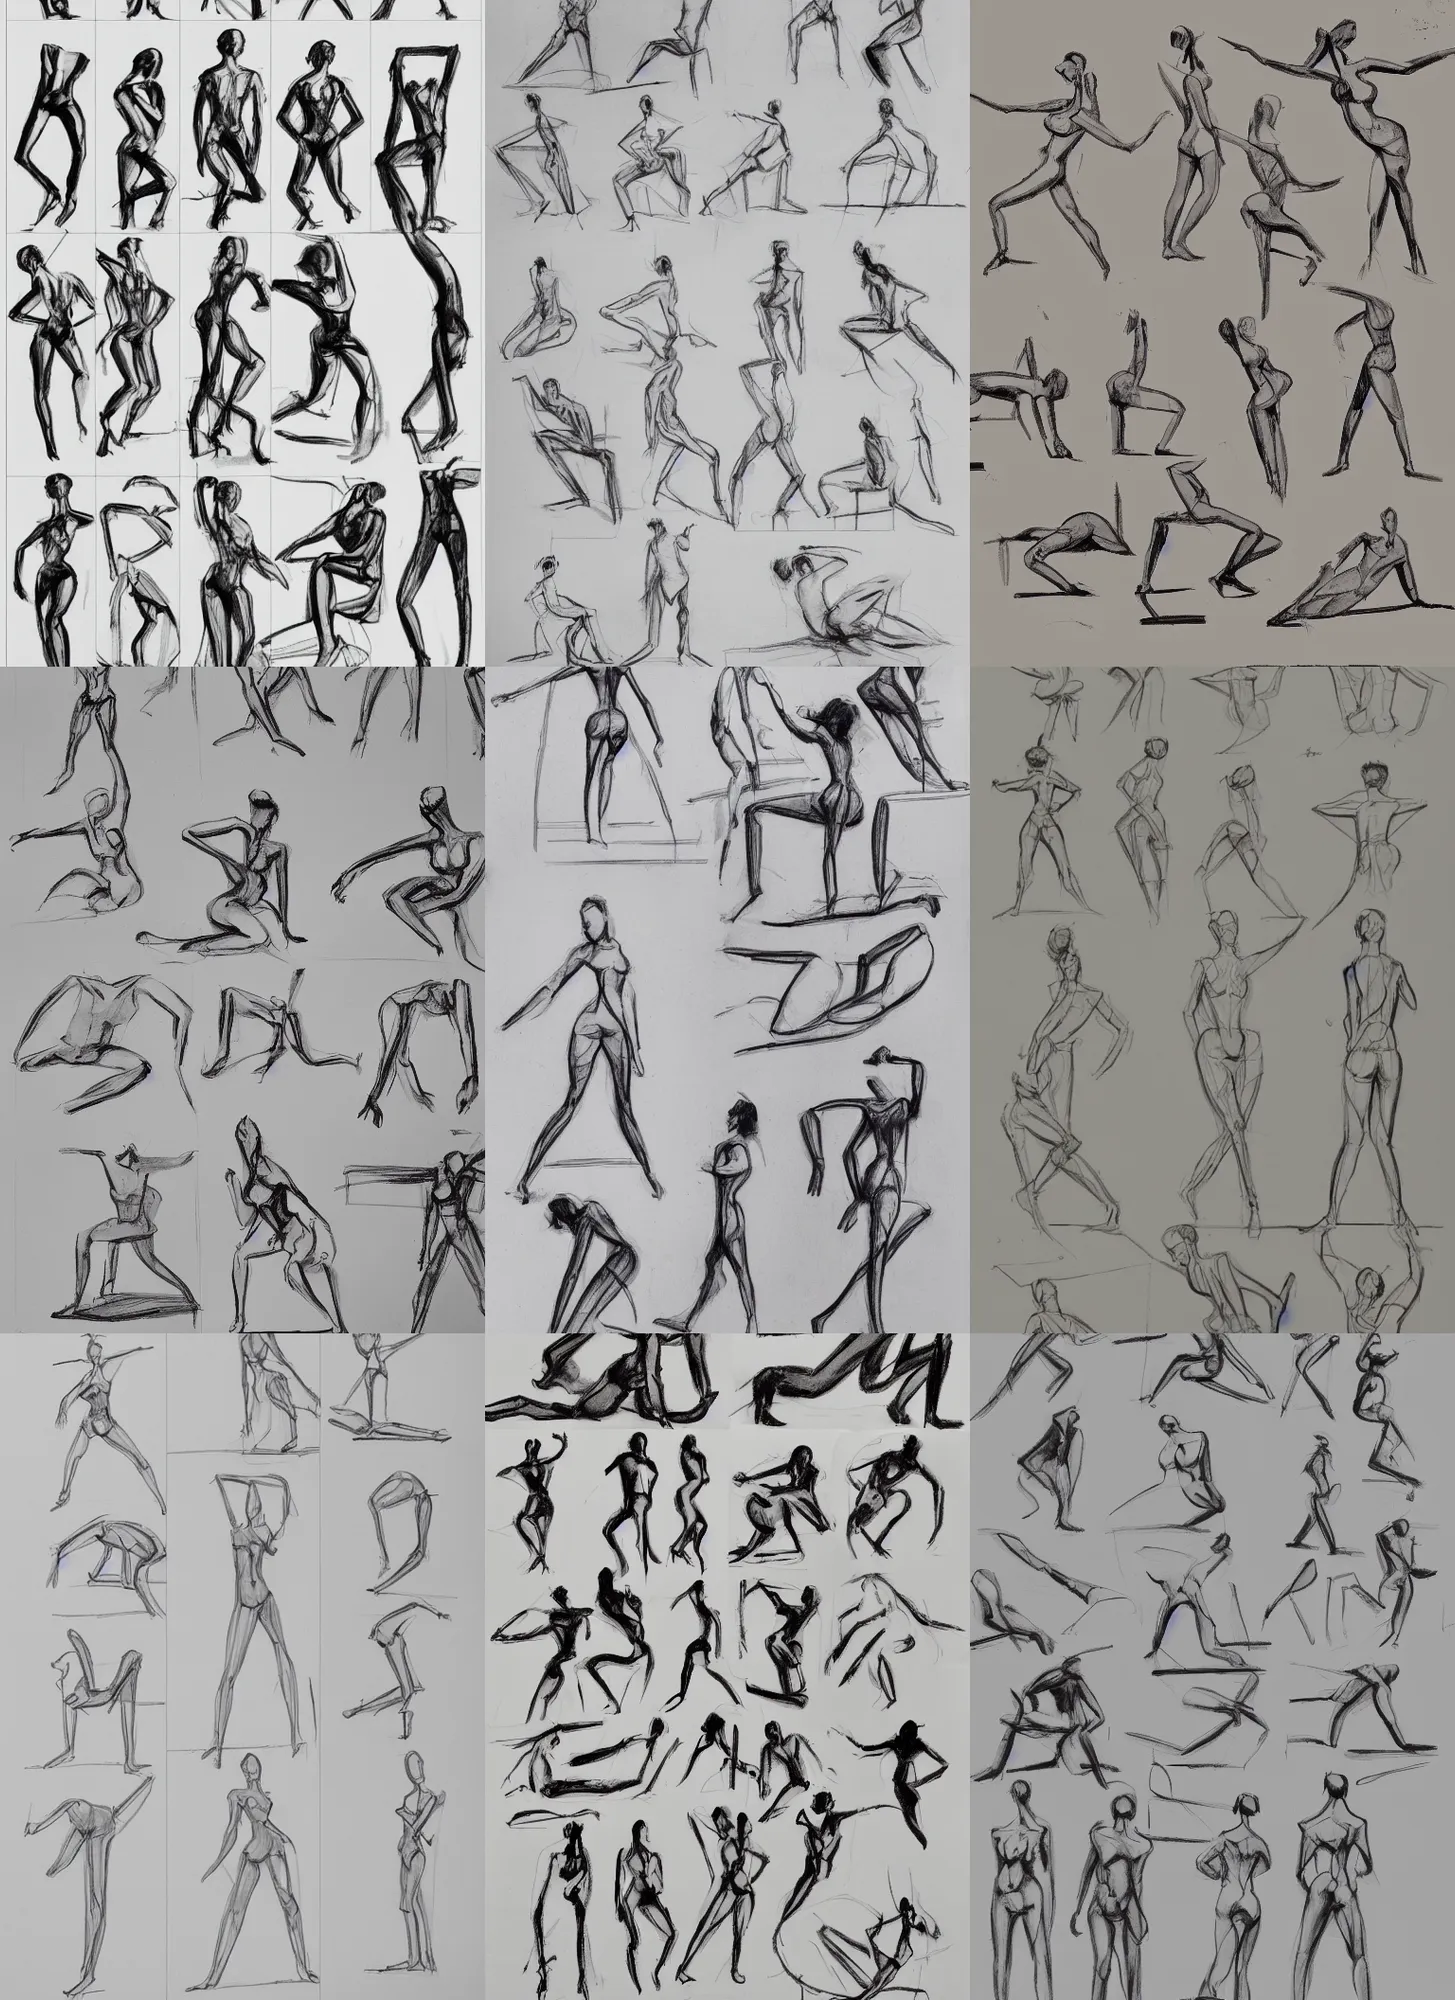 Pin by Robson J on Poses de referencia | Pose reference photo, Action pose  reference, Human poses reference